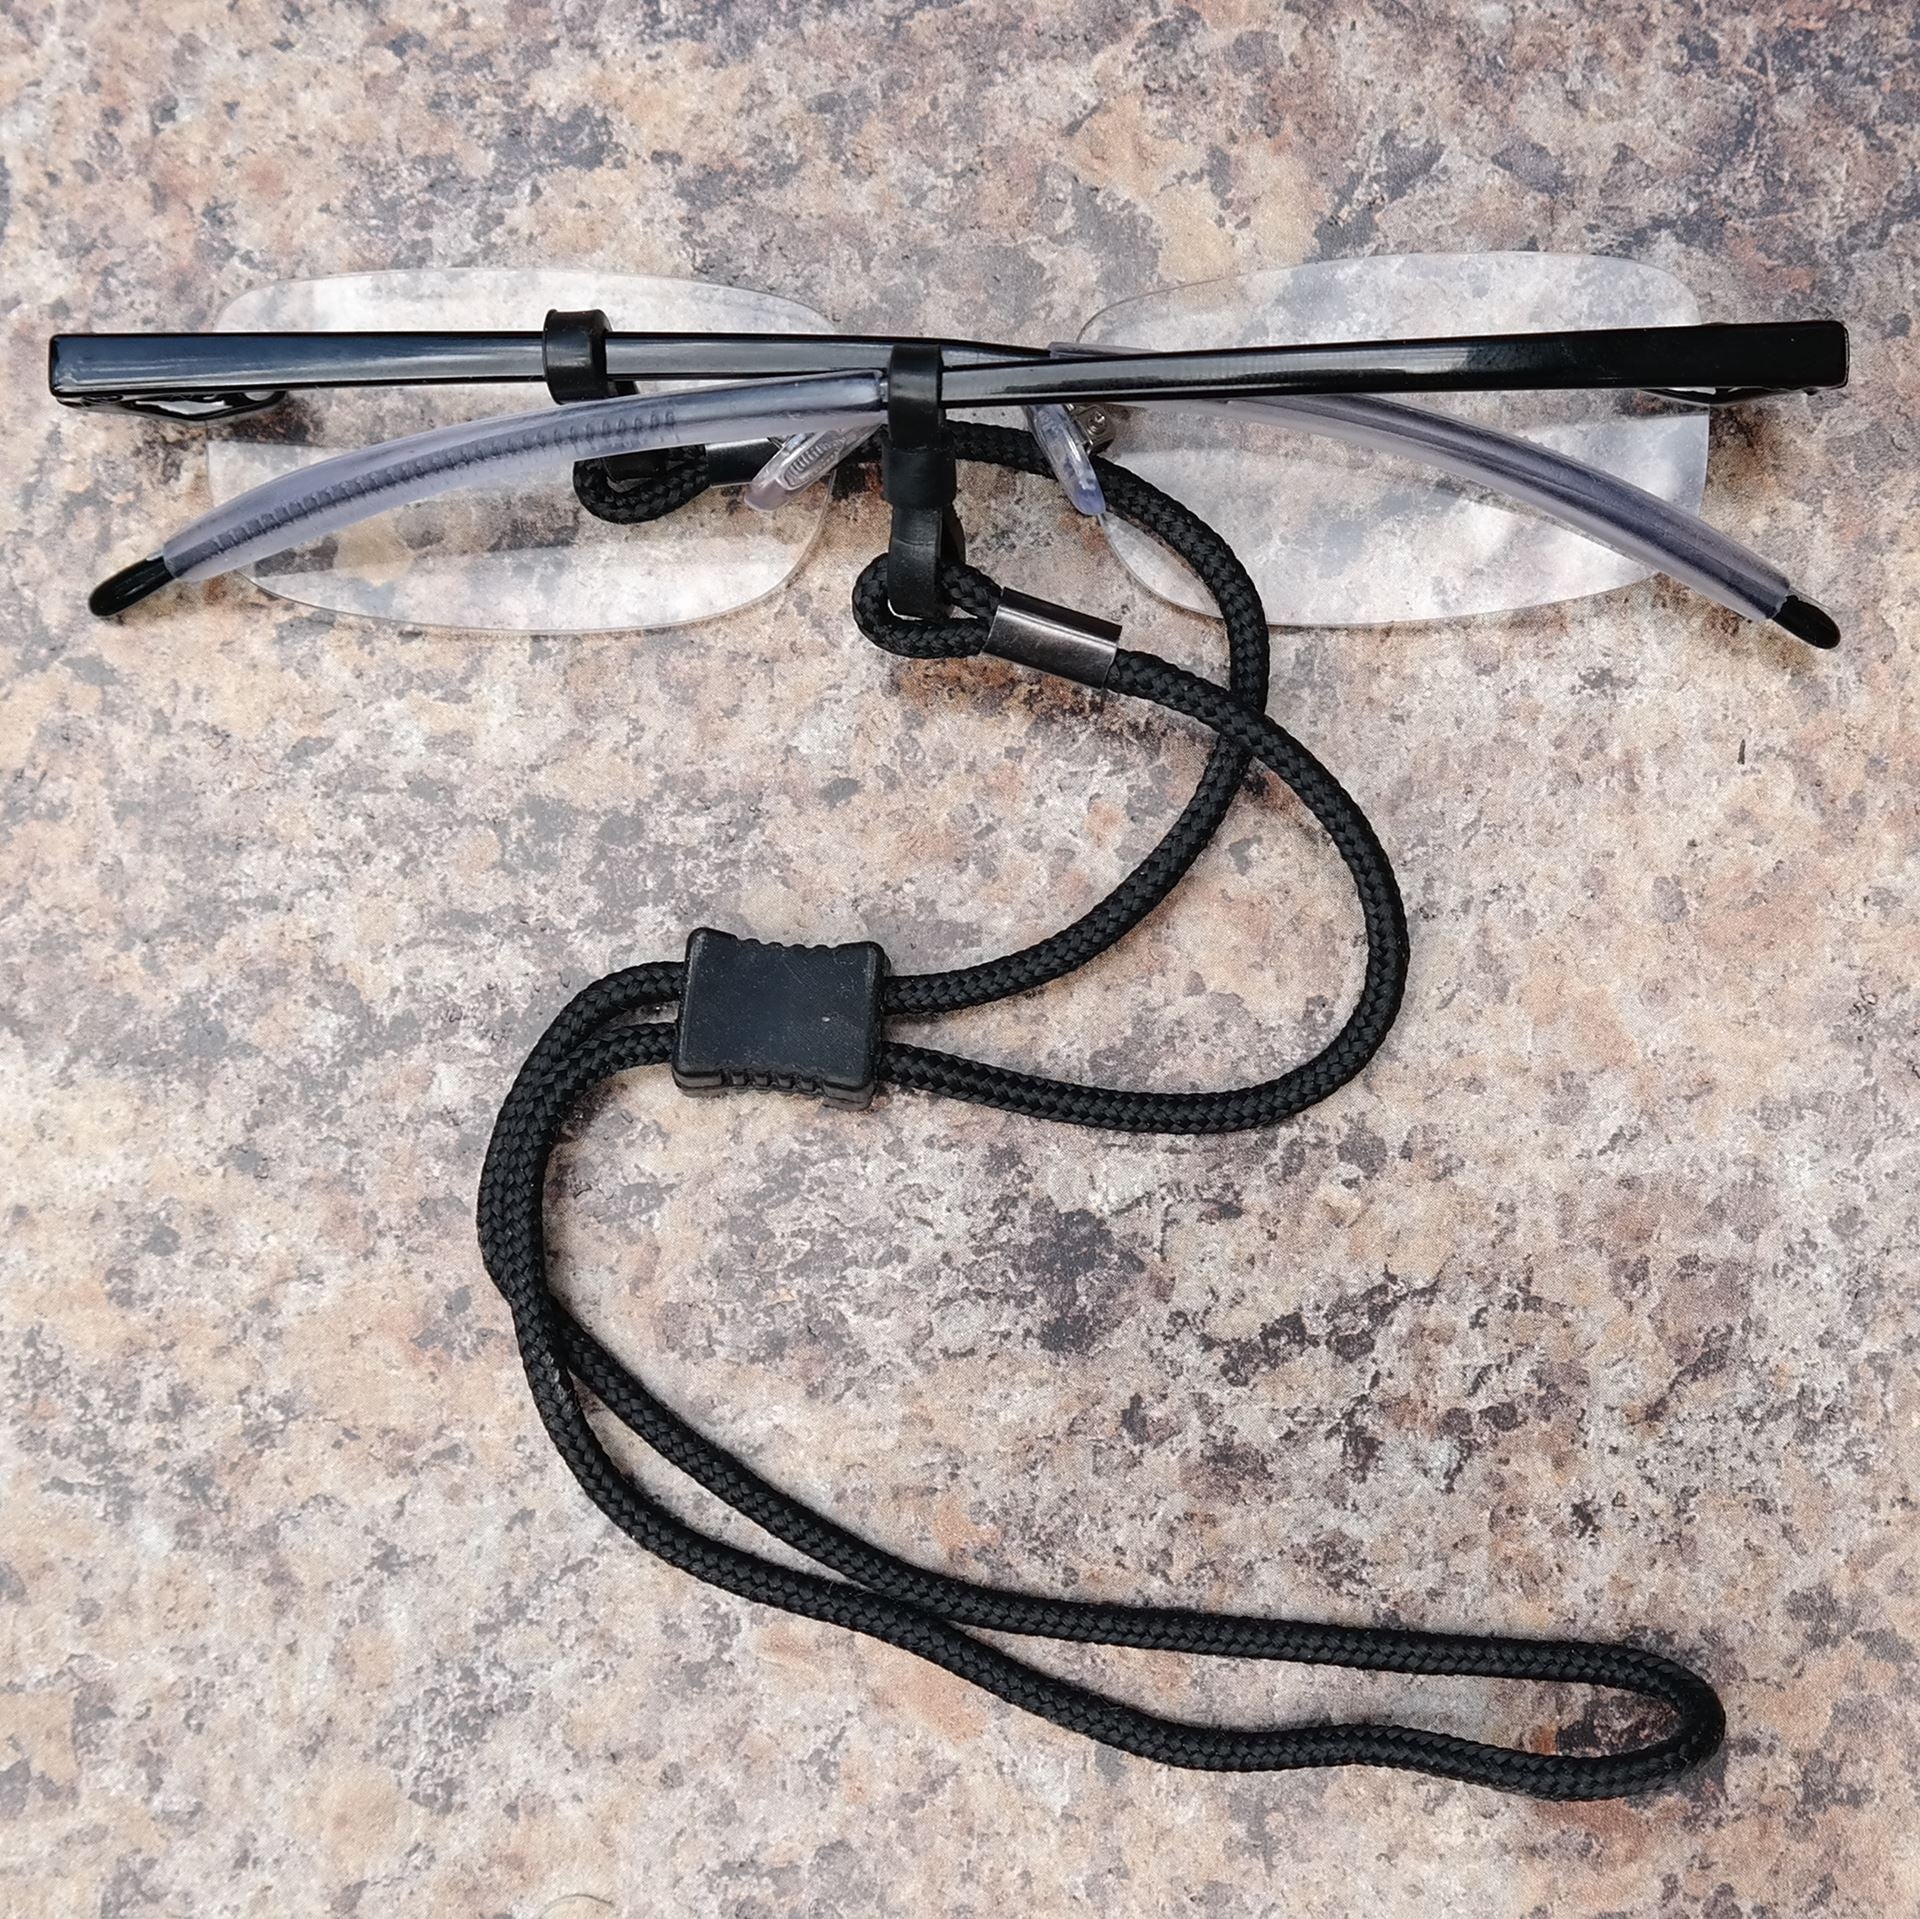 The Ultimate Reading Glasses lanyard wrapped around a pair of reading glasses, and resting on a table.